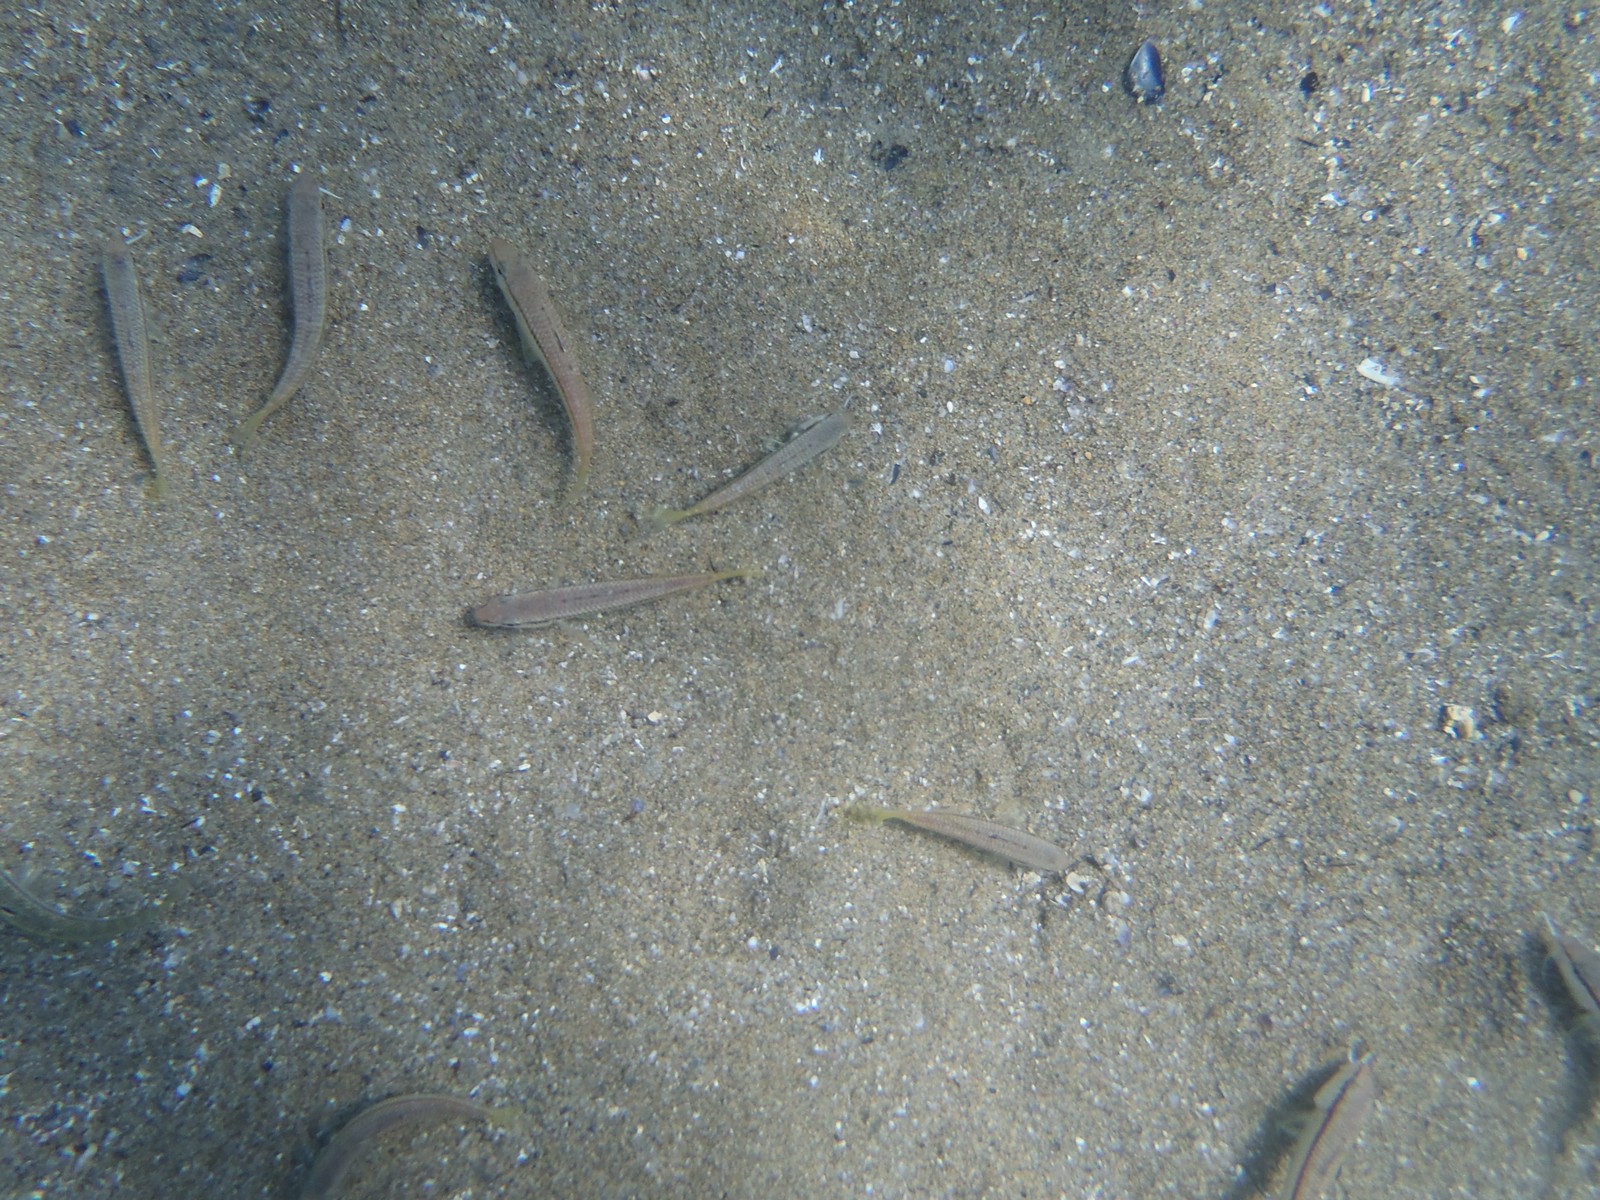 small fish and baby fishes swim in the sand